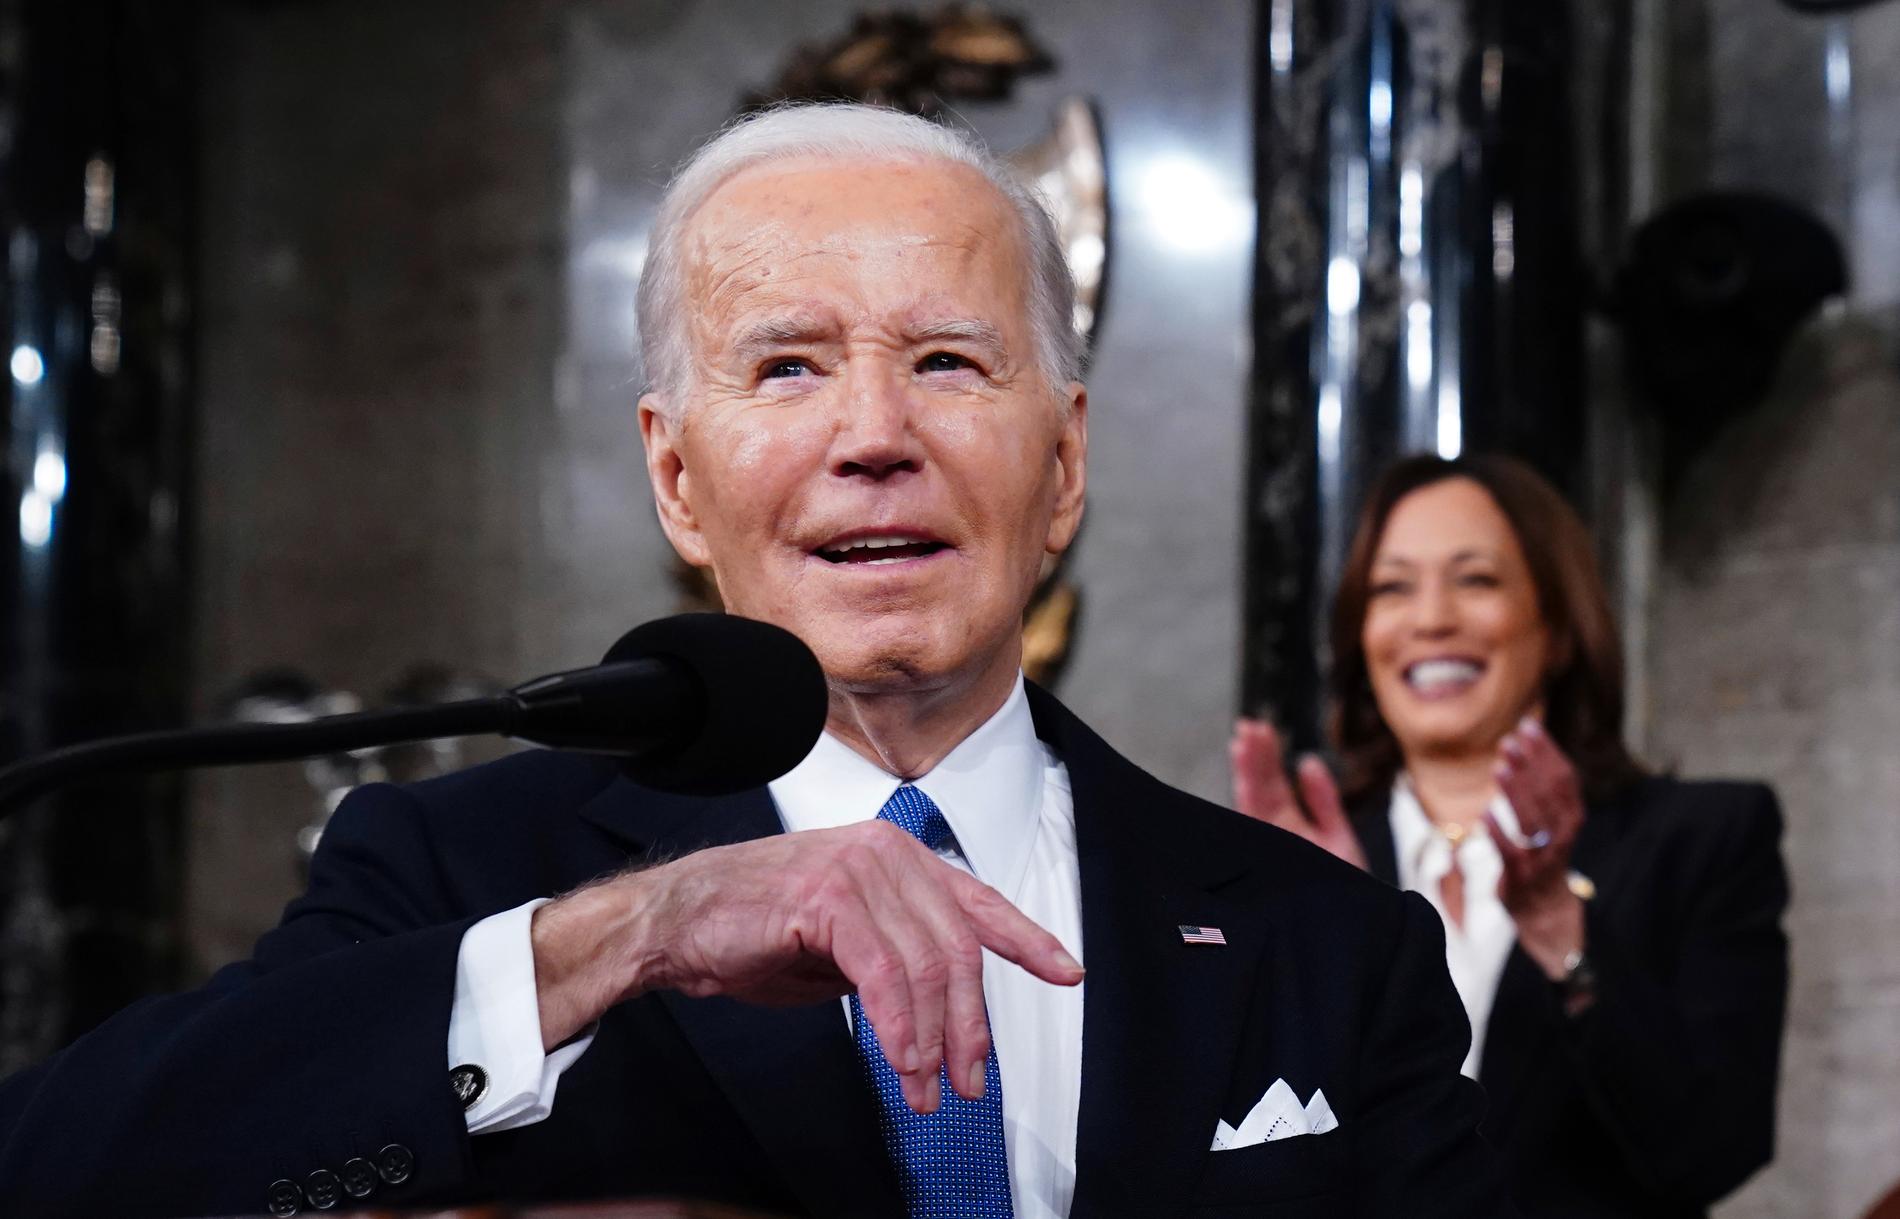 The Polarization of Values: Biden’s State of the Union Address Highlights Political Divide in US